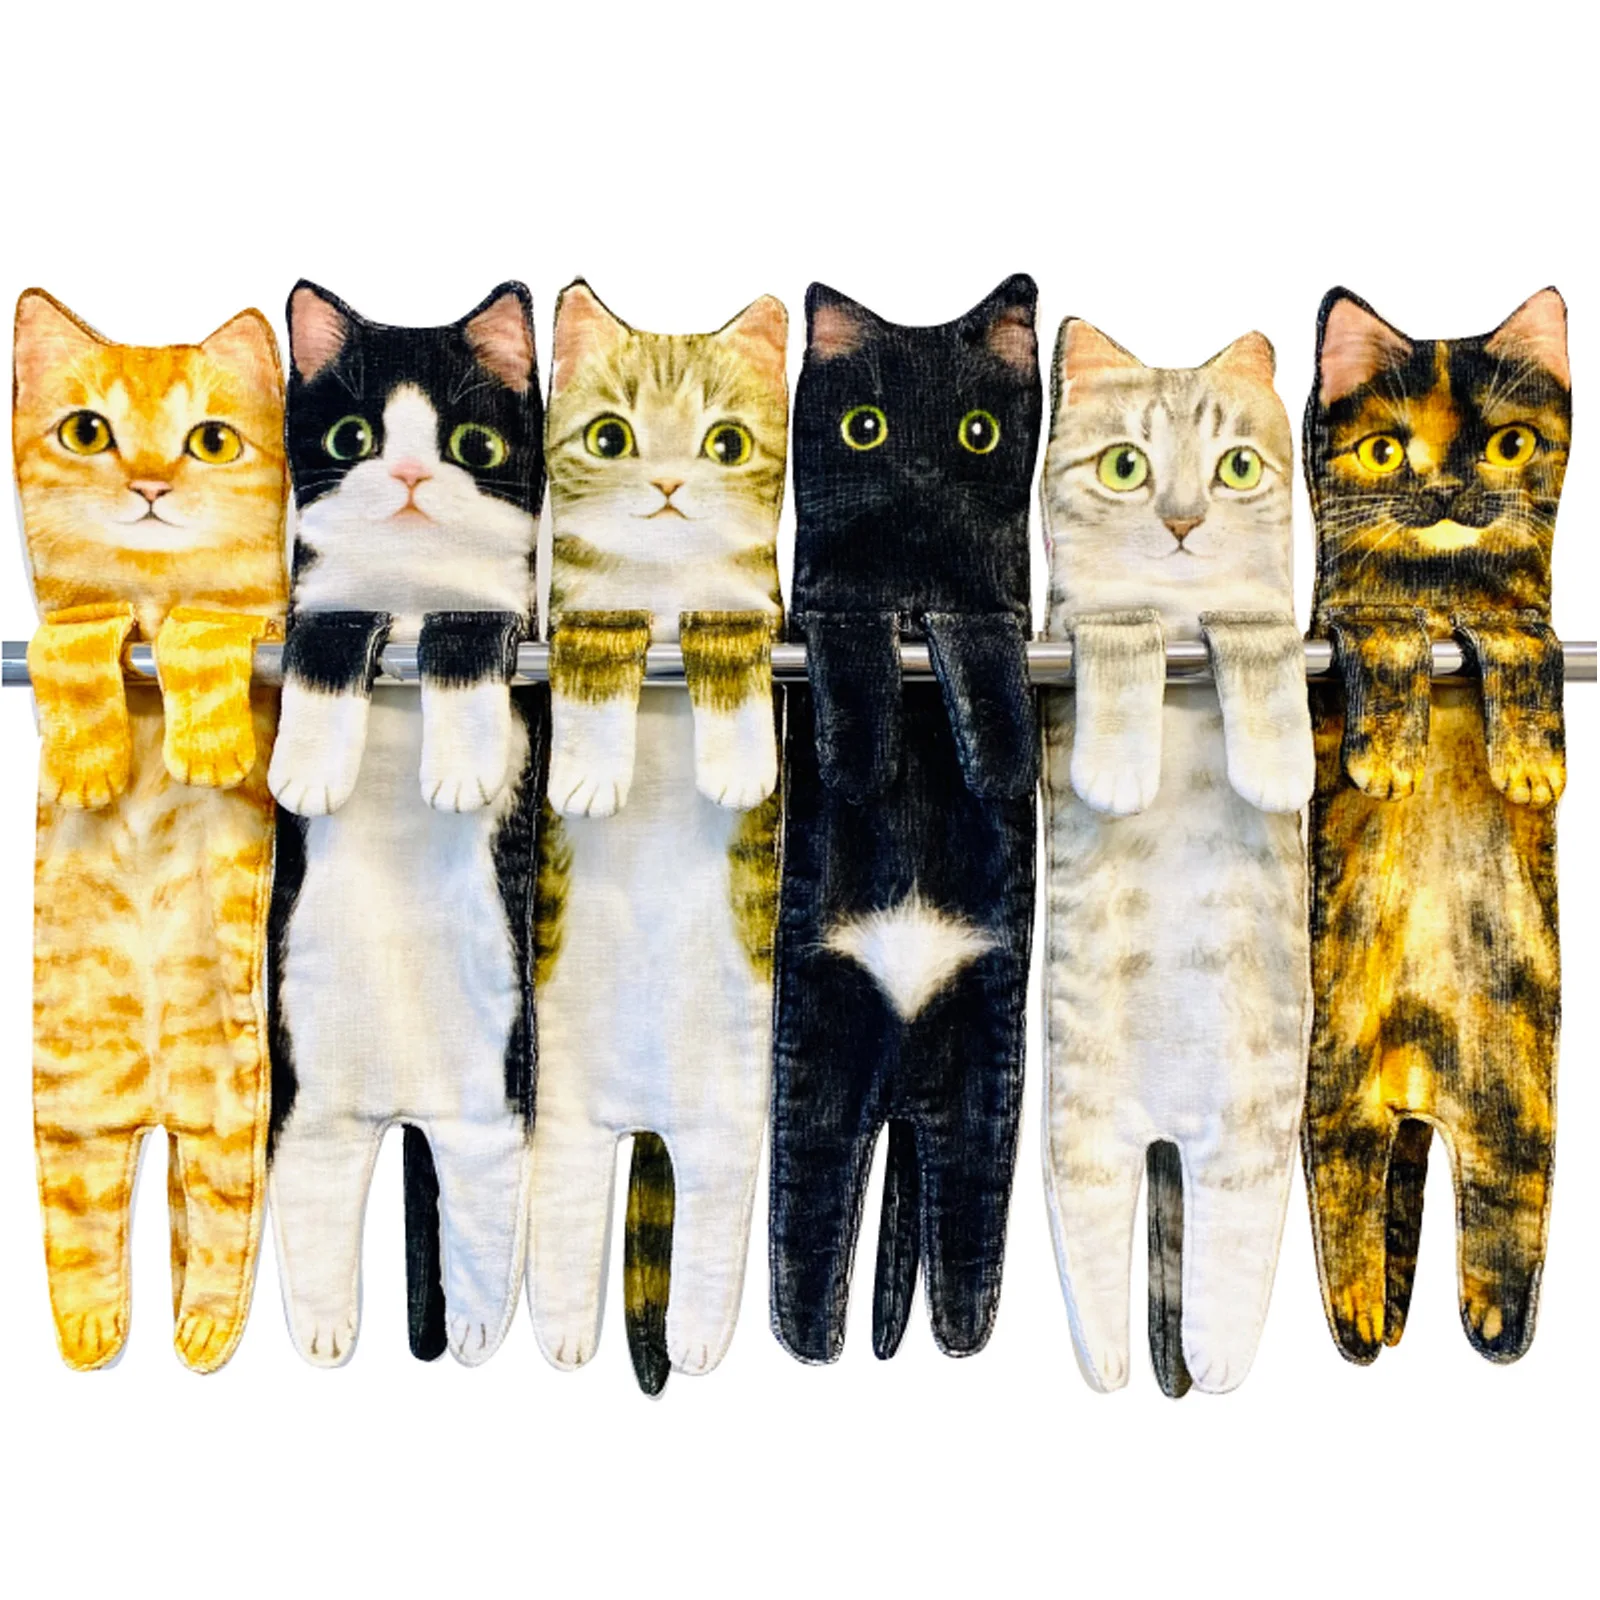 Cat Hand Towels for Kitchen Bathroom - Cute Cat Decor Gadgets - Hanging  Soft Absorbent Hand Face Towel 